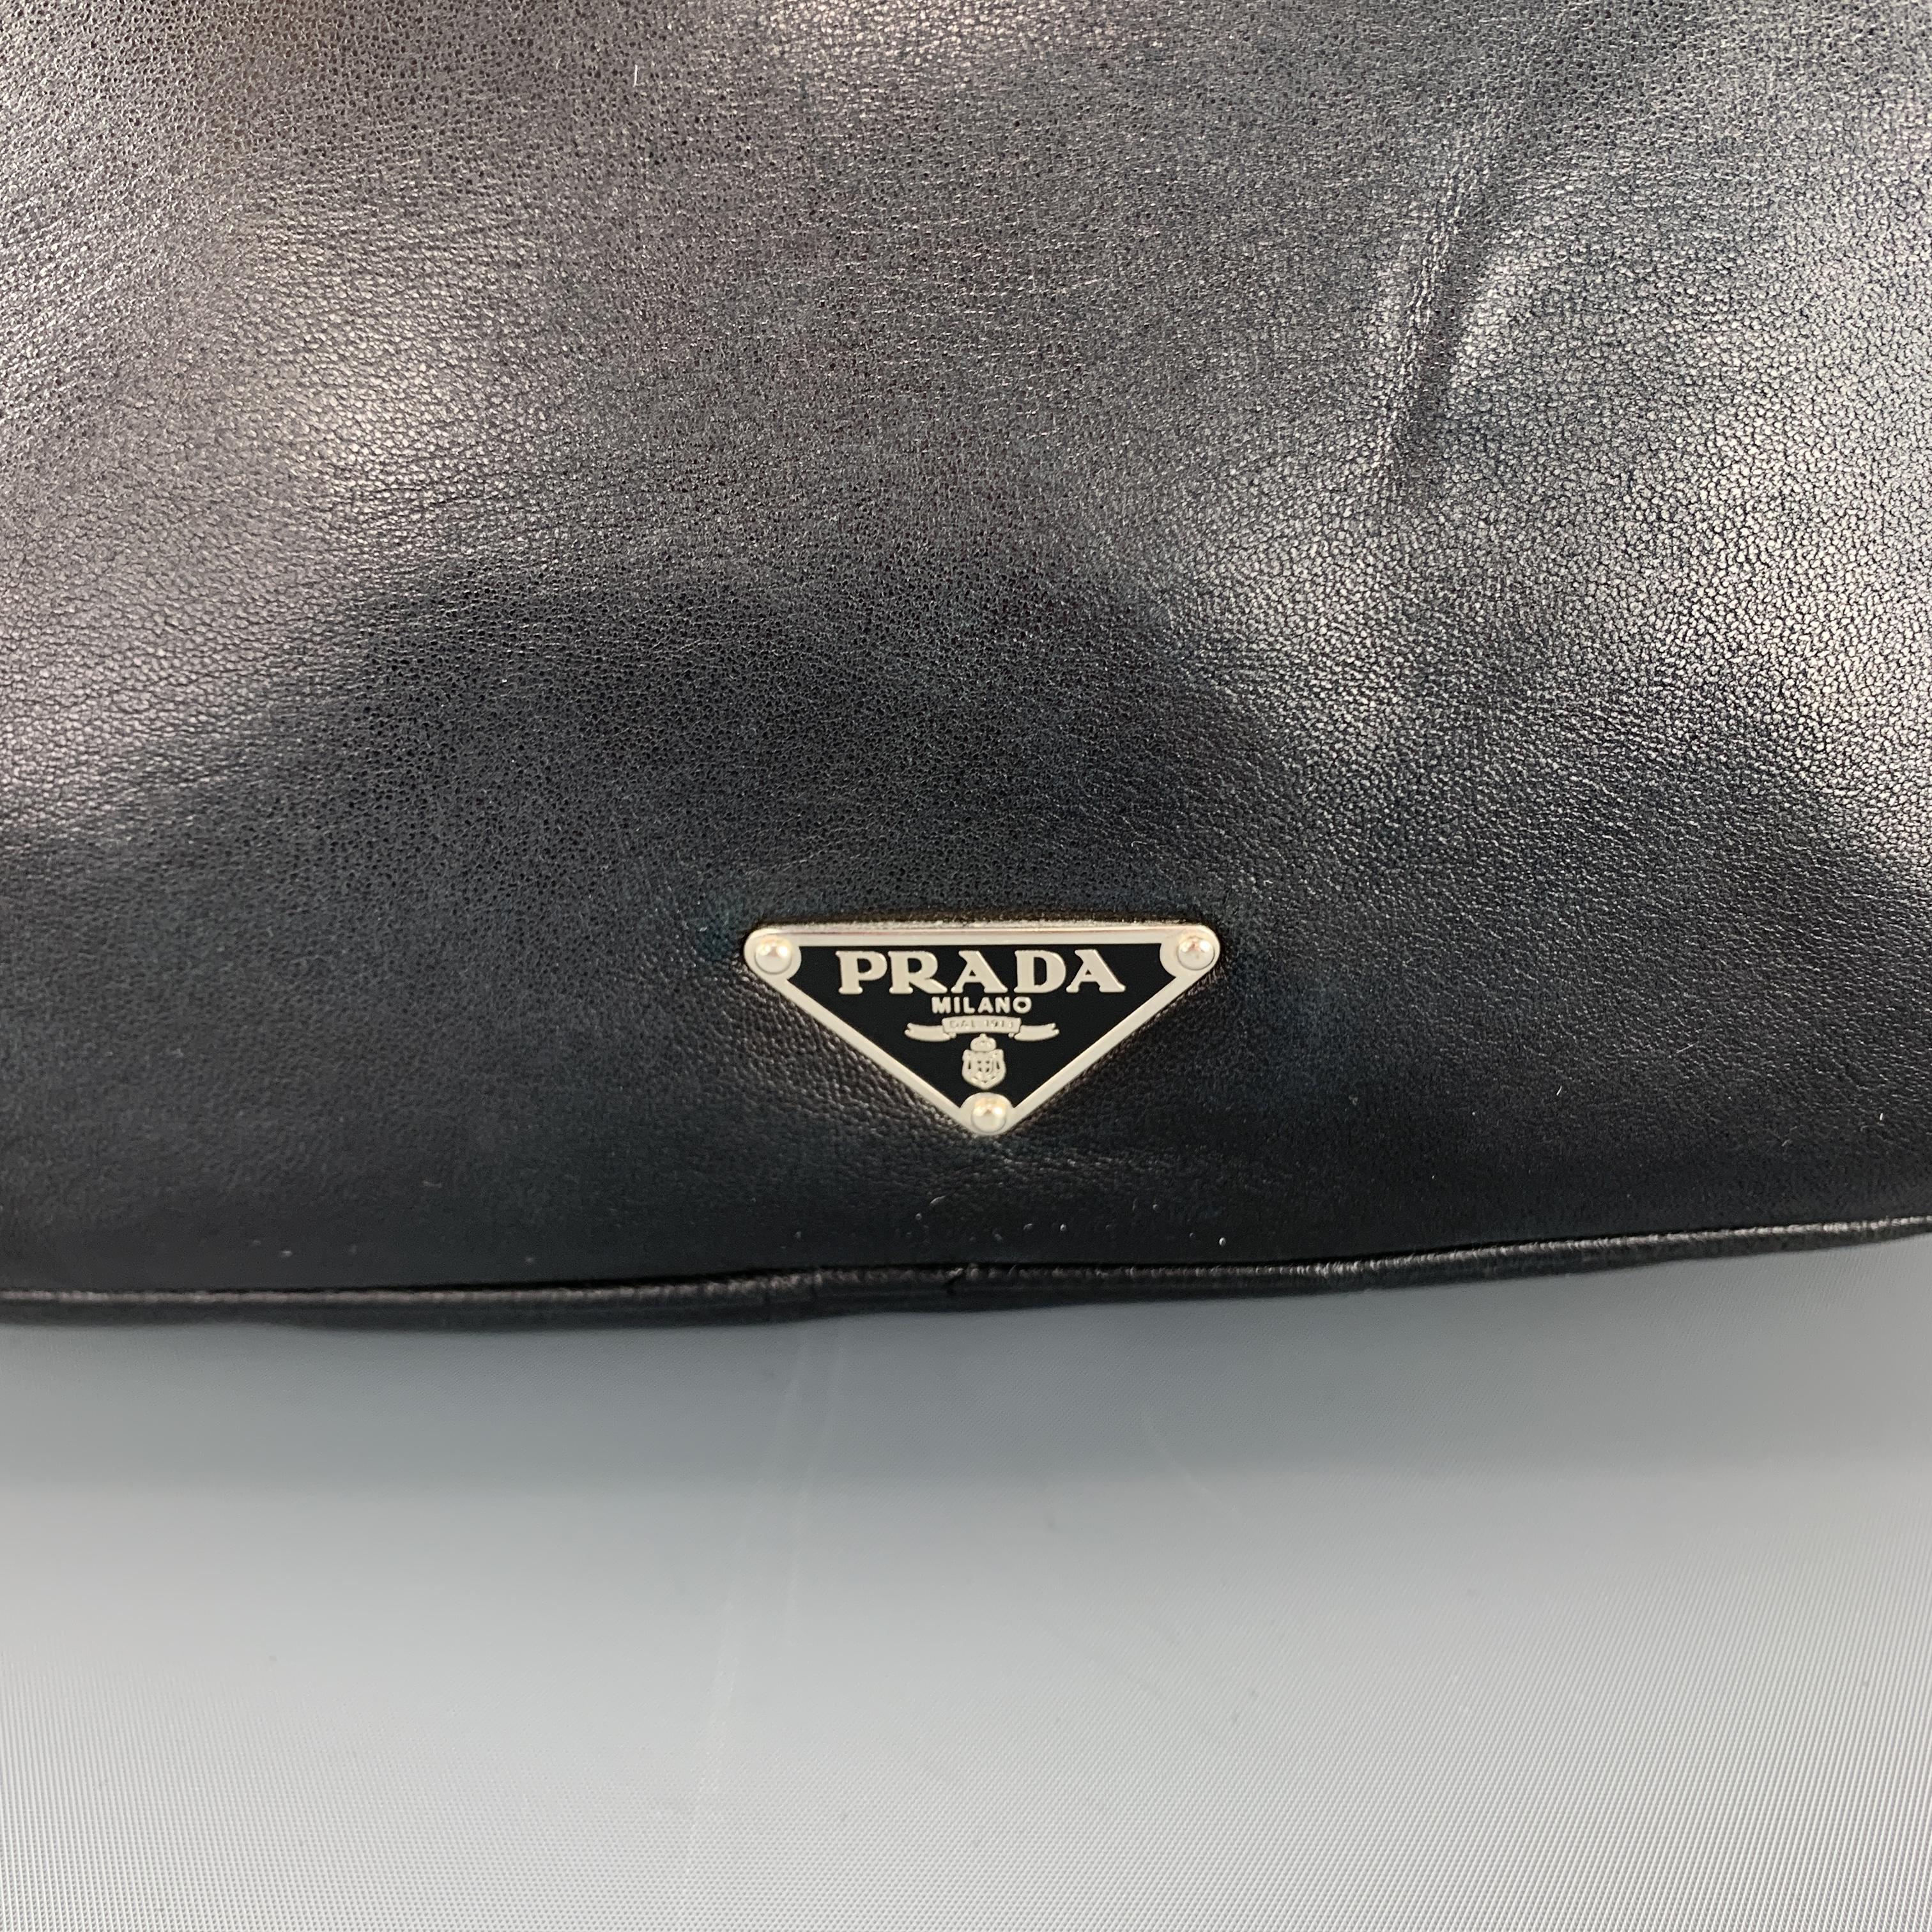 Vintage PRADA messenger bag comes in soft black leather with a frontal zip pocket, silver tone black enamel triangle plaque, back snap pocket, top zip closure, and webbing crossbody strap with leather accent. Wear throughout leather. As-is. Made in